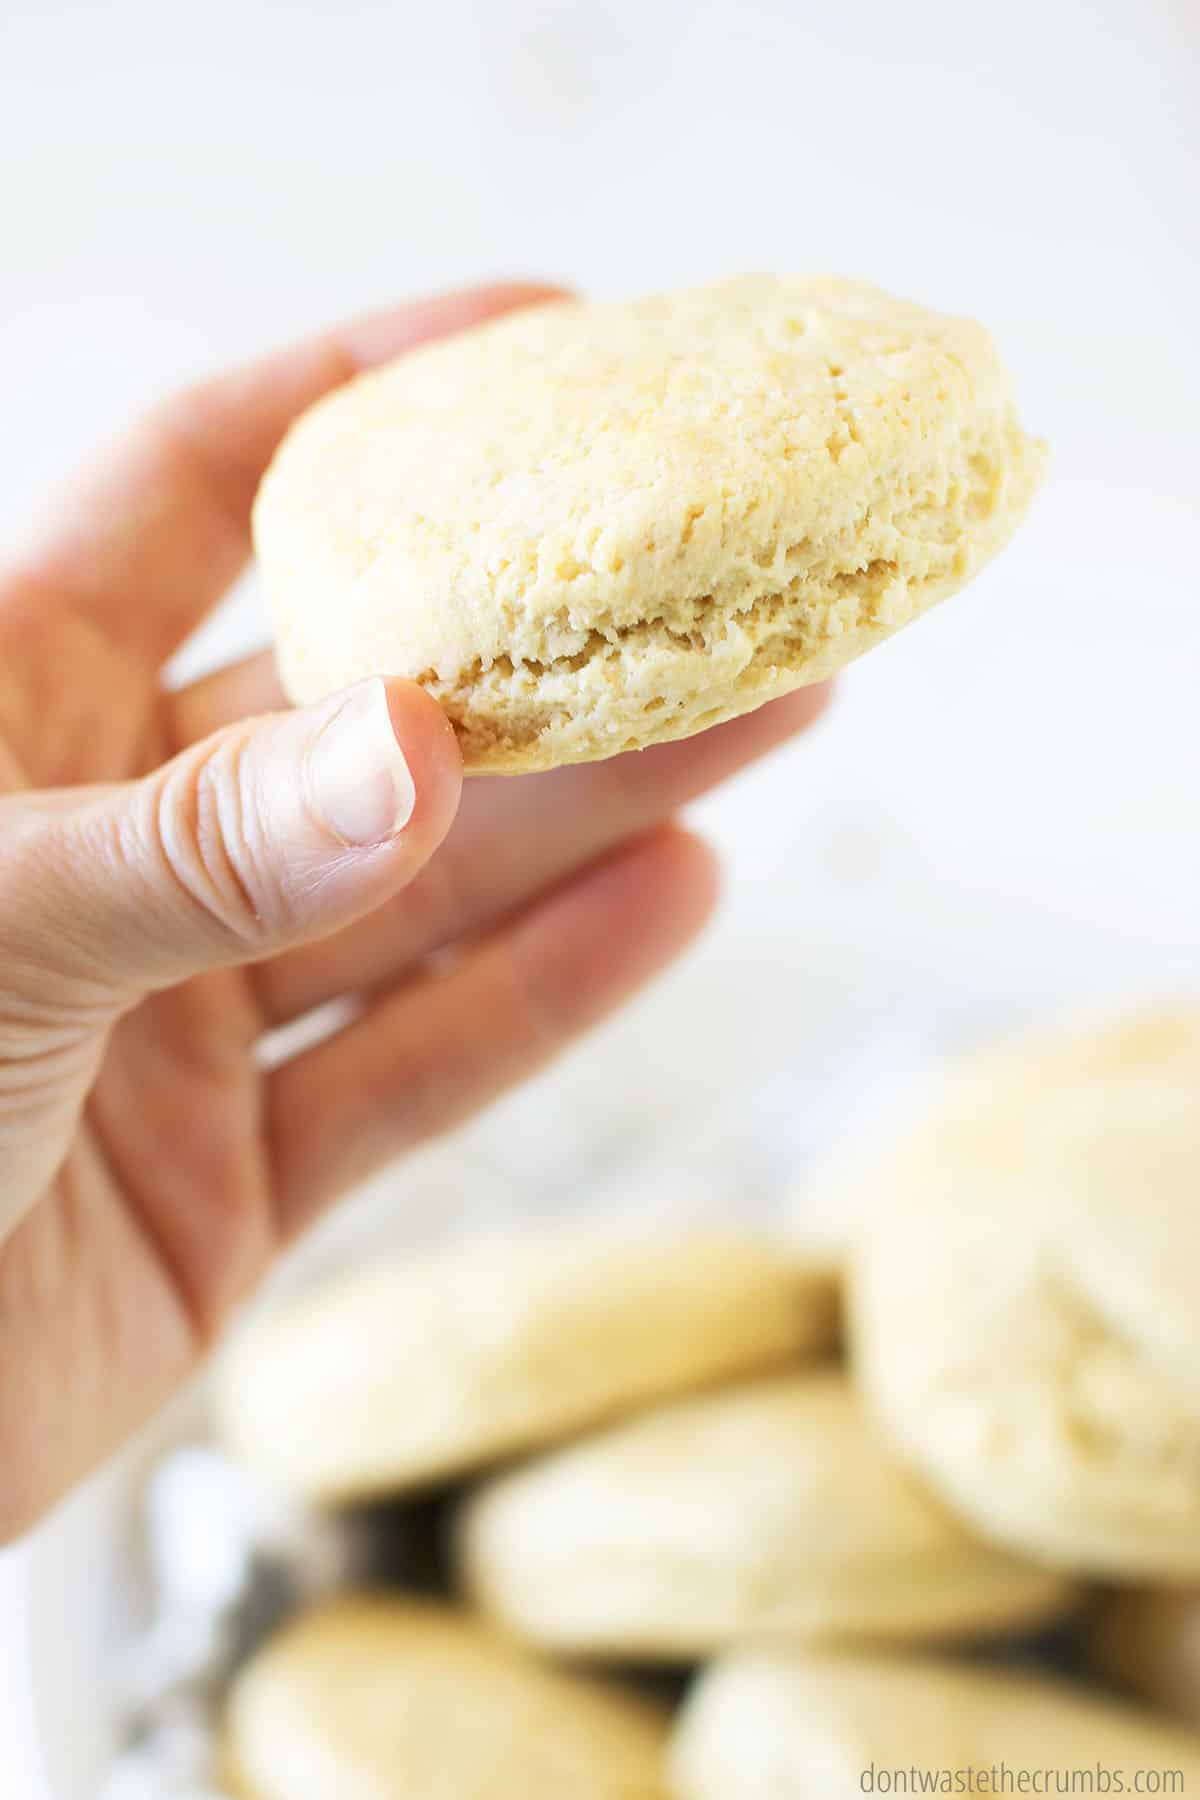 Hand holding a homemade biscuit.